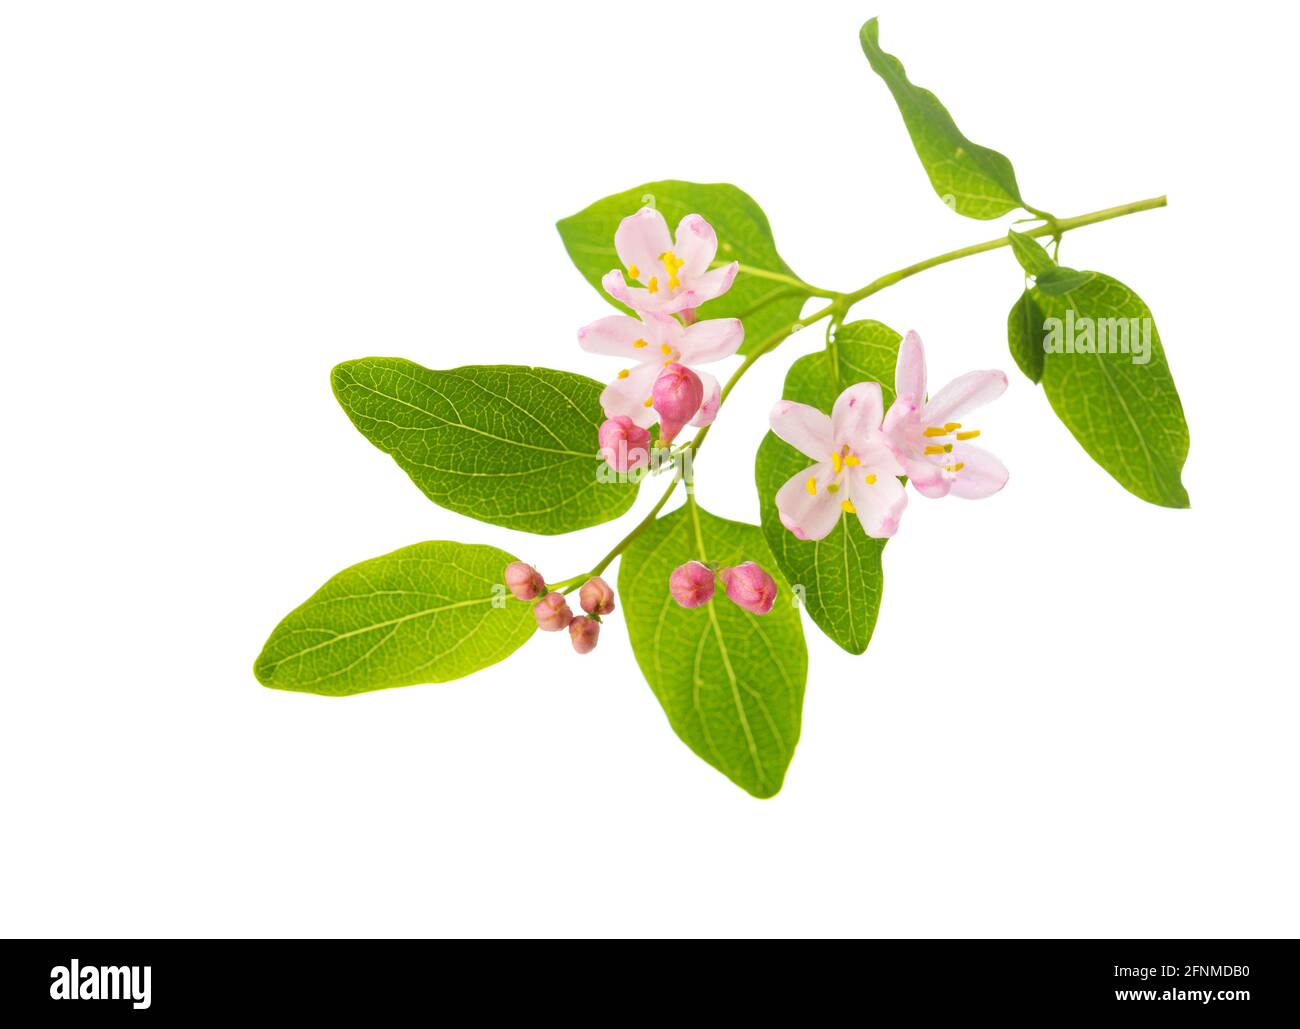 Branch with small light pink  flowers of  Honeysuckle (Tatarian Honeysuckle) isolated on white background. Selective focus. Stock Photo